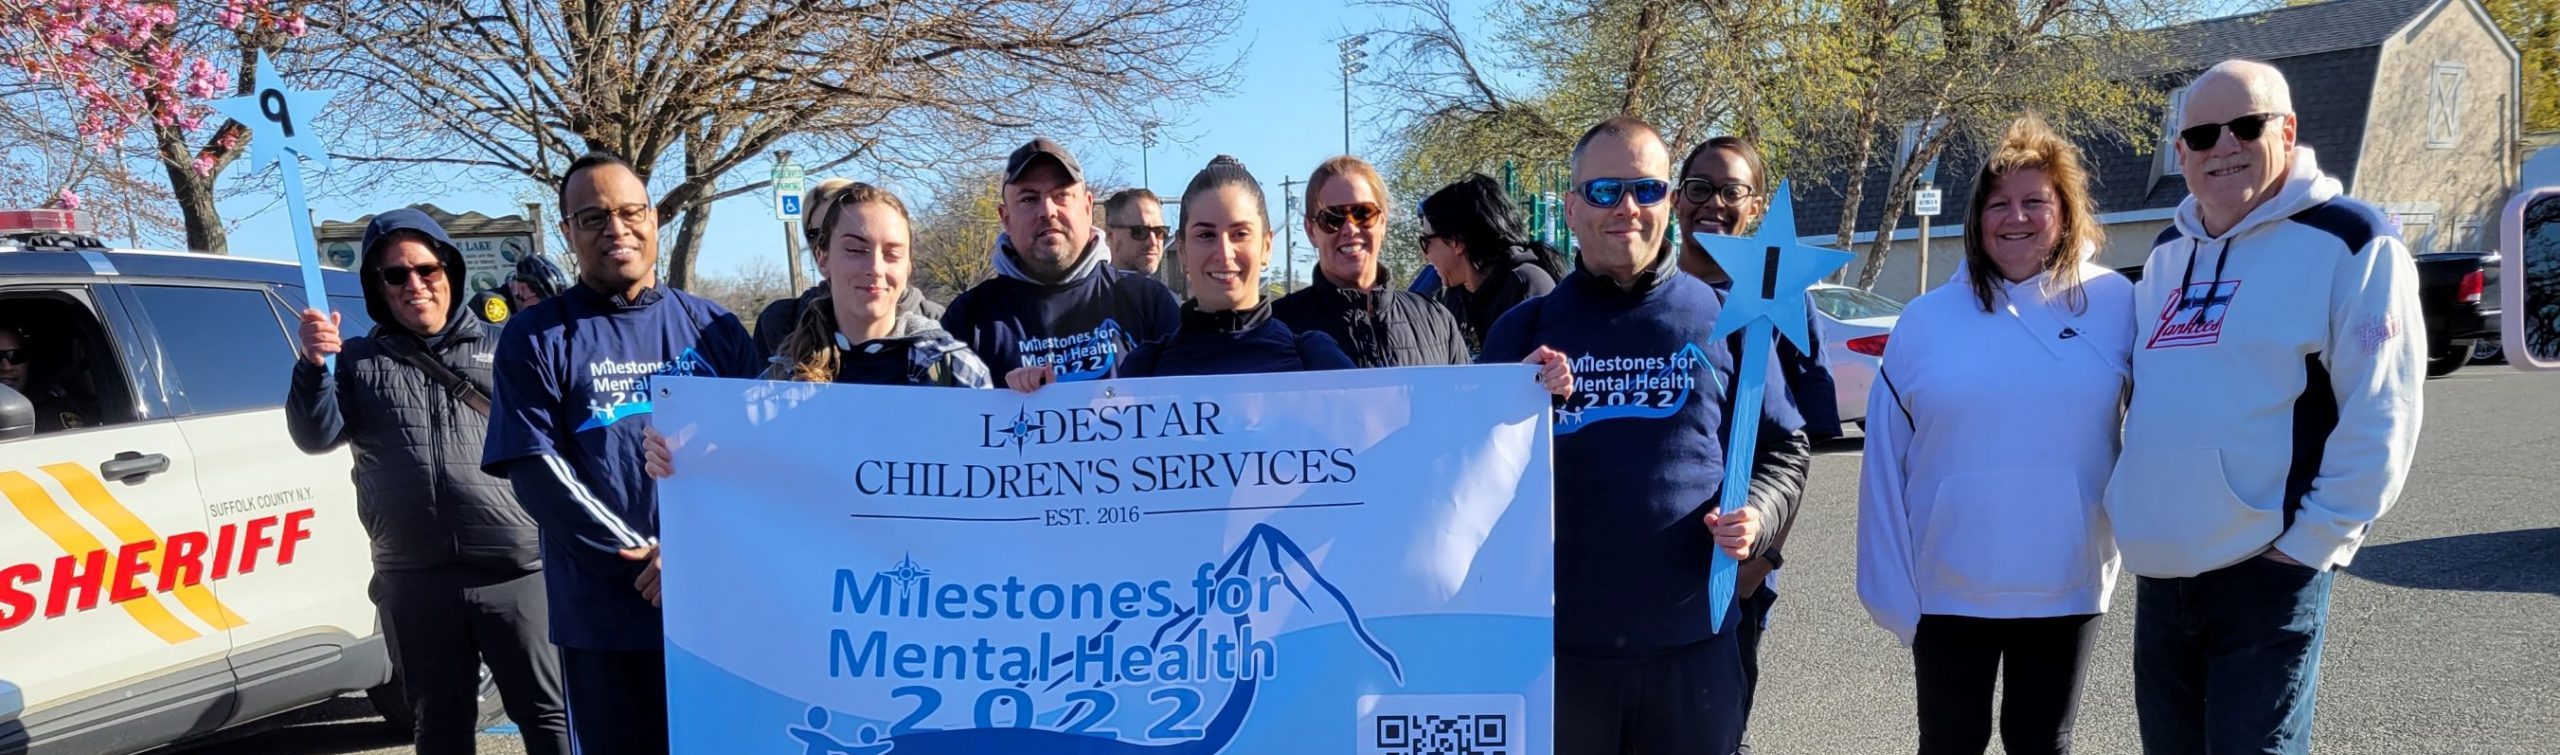 Our 2nd Annual Milestones for Mental Health Event